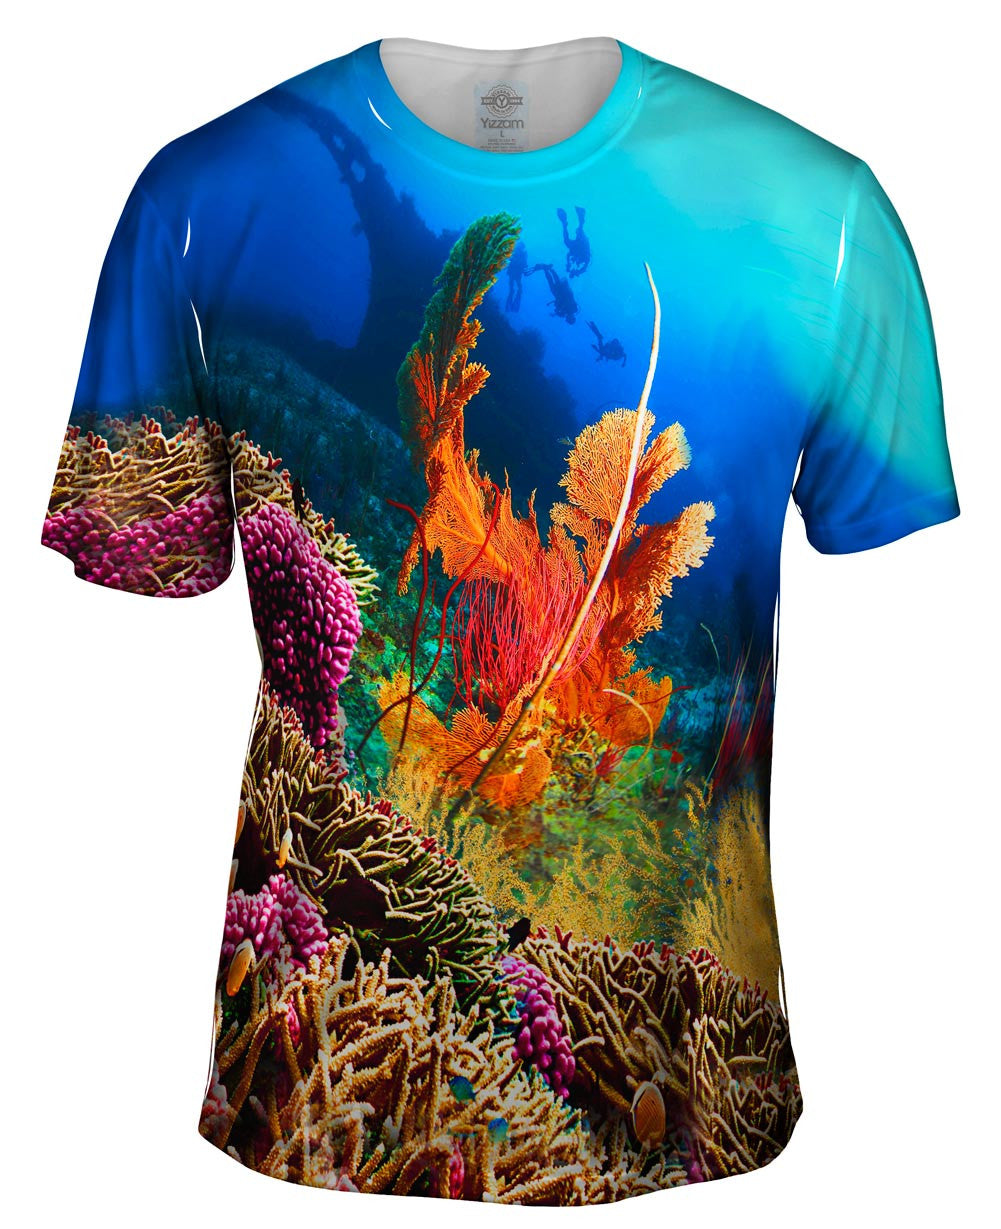 Coral Reef 001. , Where All The Street Stopping Style T-shirts Go!  Looking for A Funny T-Shirt, A Cool T-Shirt, A Crazy T-Shirt? Come